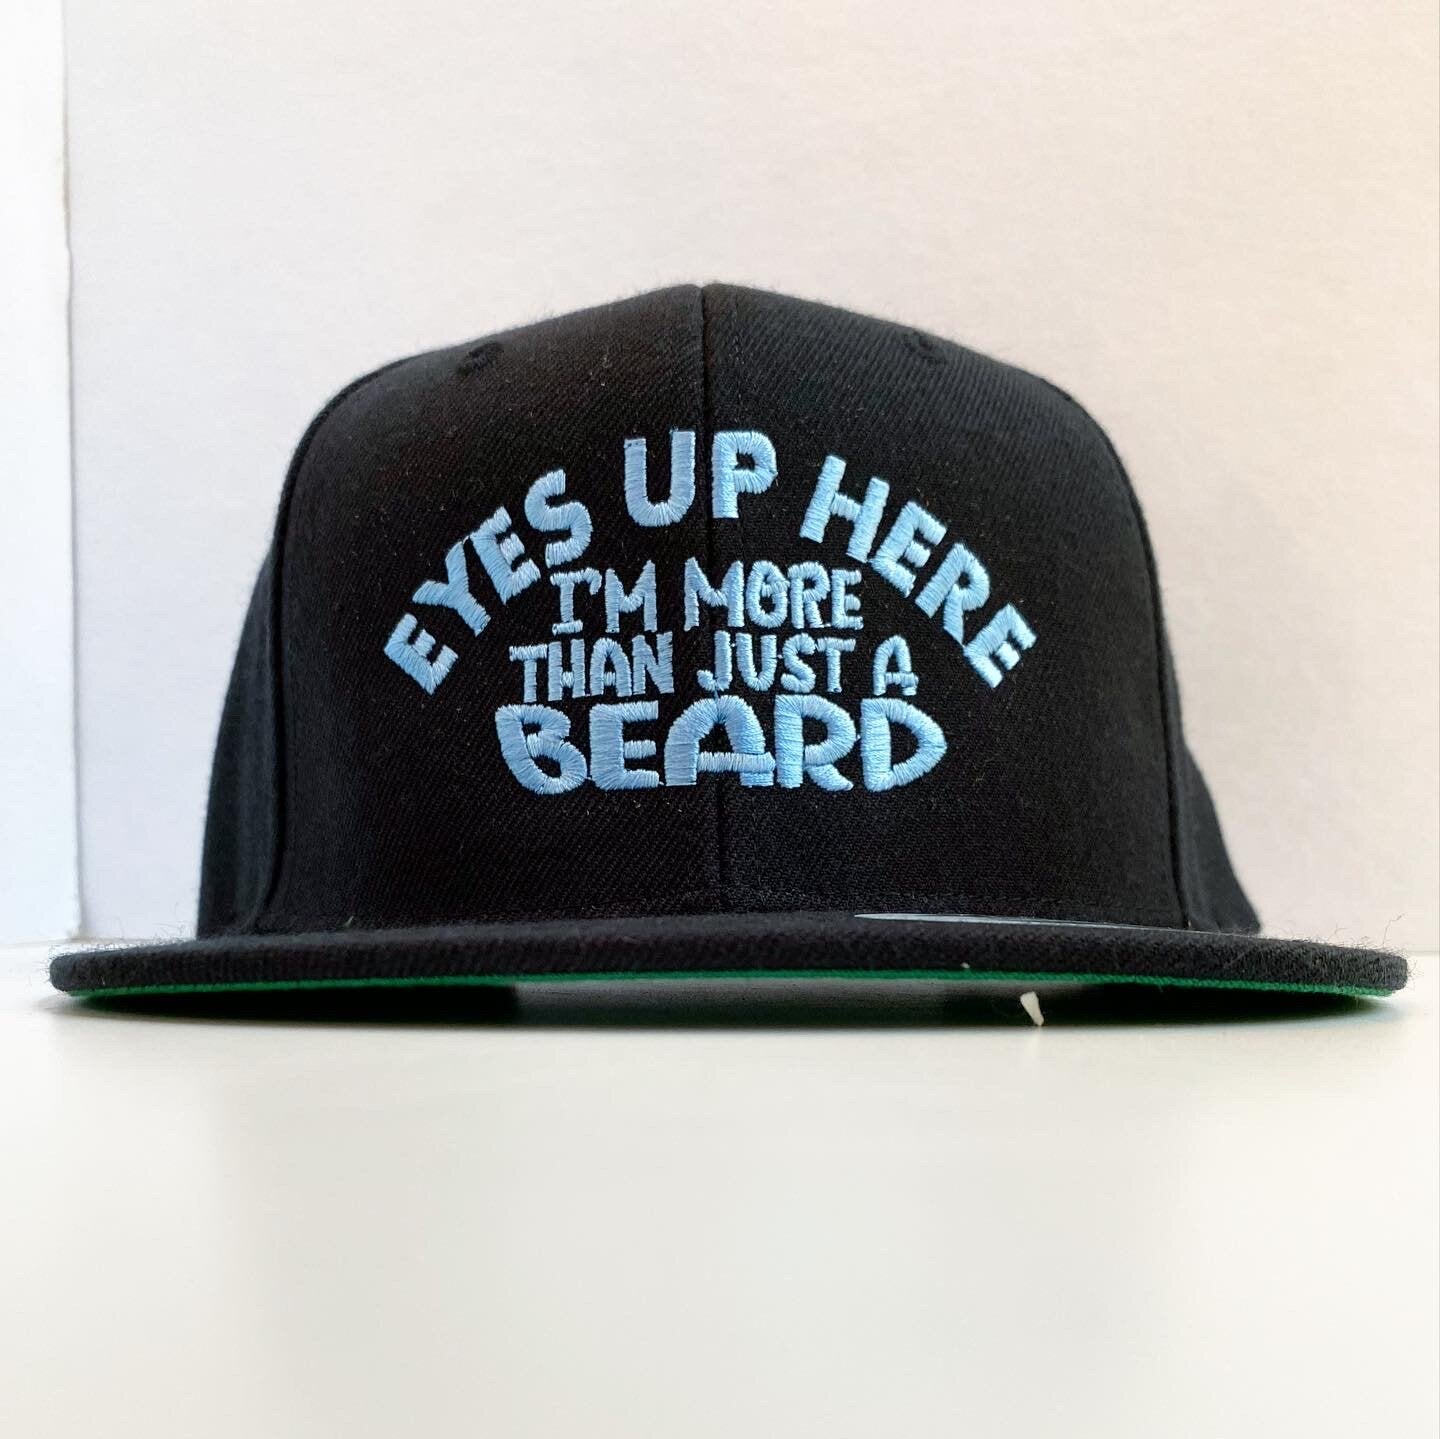 EYES UP HERE IM MORE THAN JUST A BEARD HAT